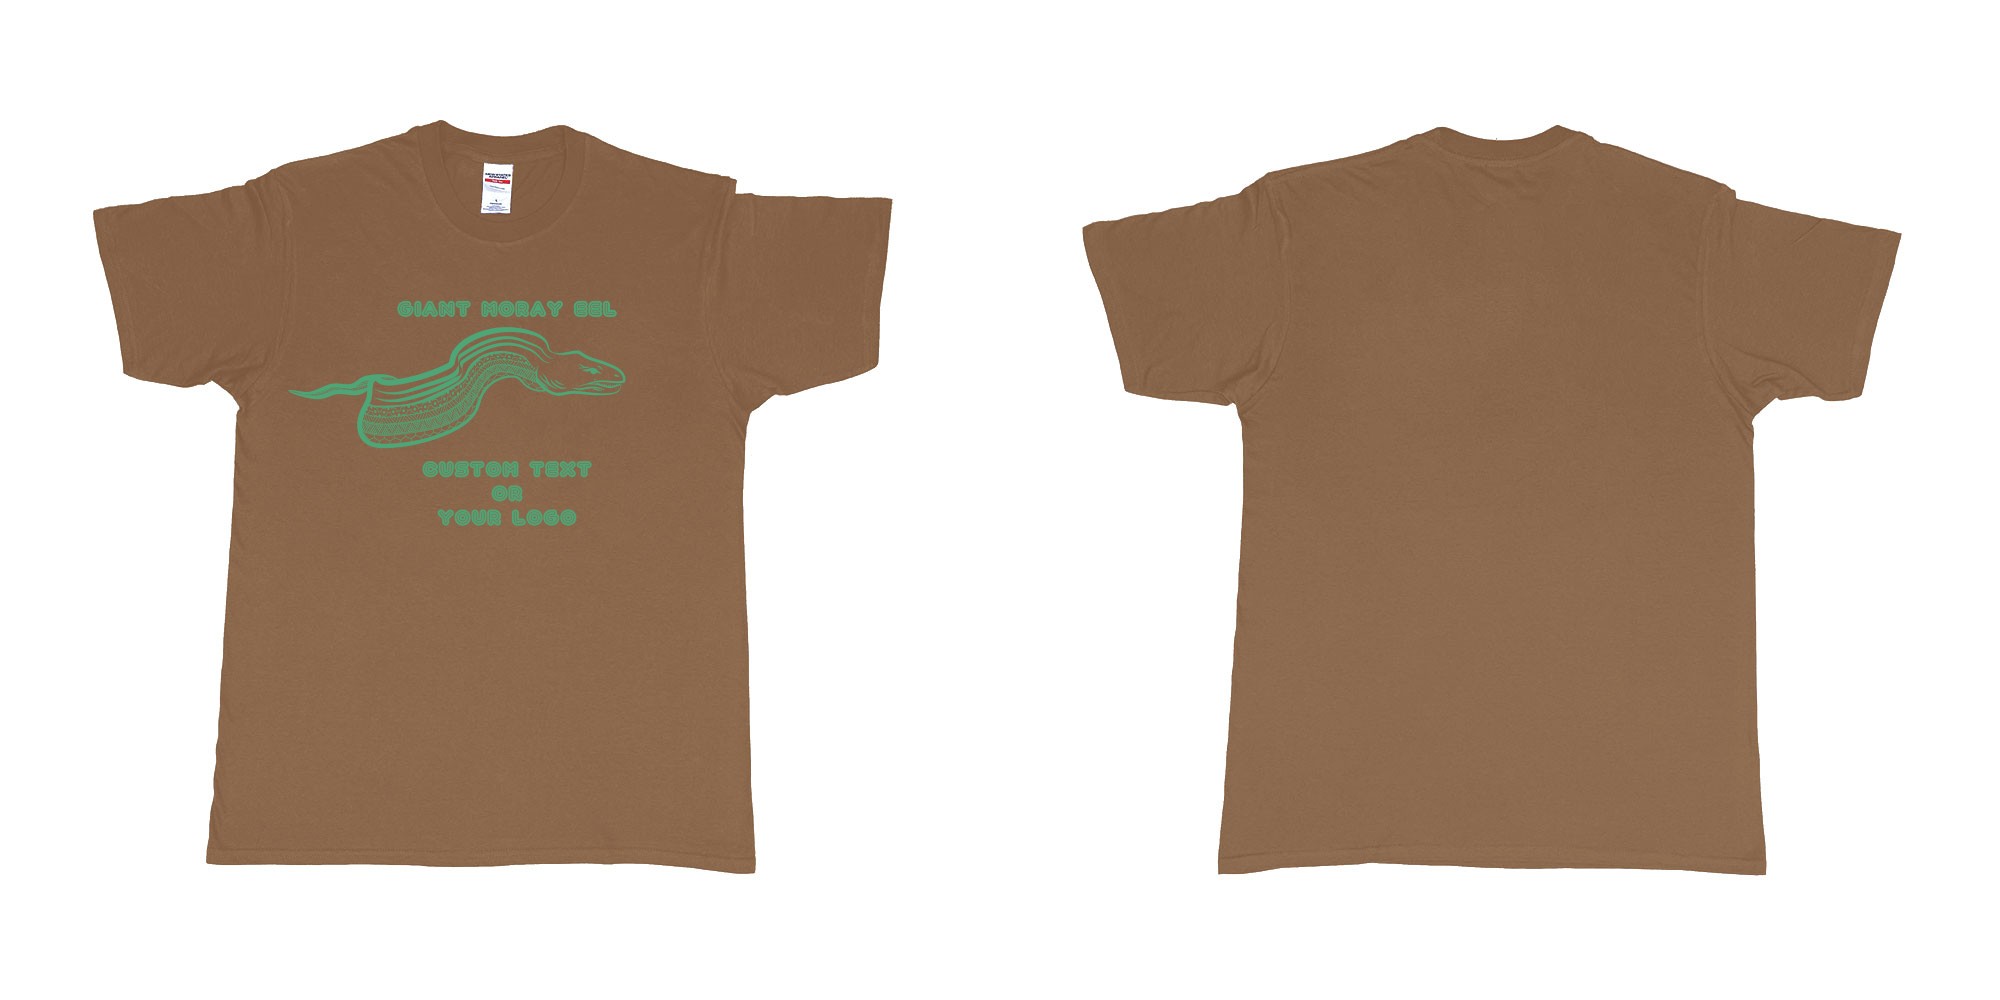 Custom tshirt design giant moray eel tribal in fabric color chestnut choice your own text made in Bali by The Pirate Way